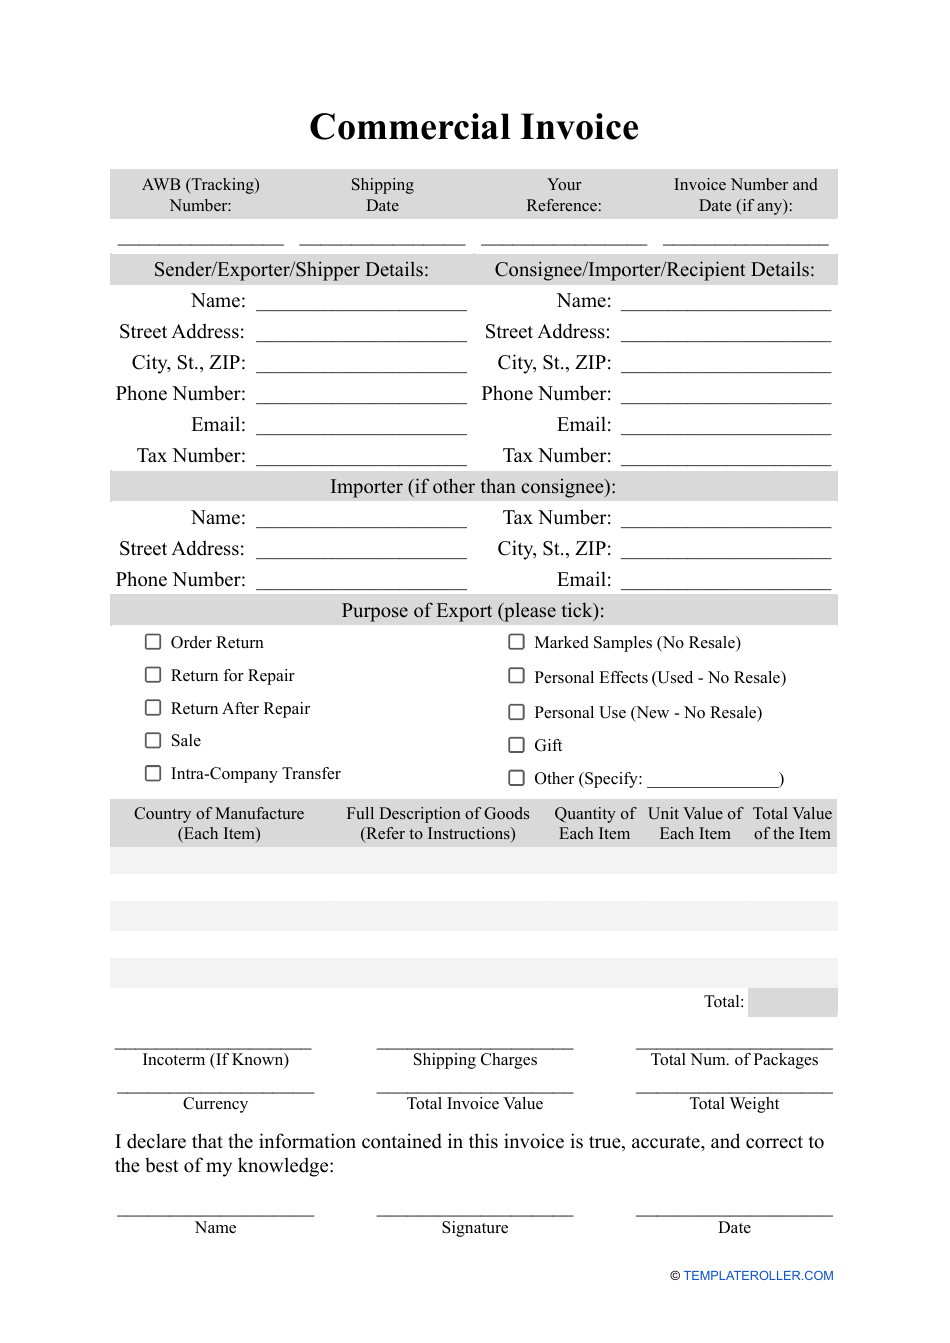 Commercial Invoice Template, Page 1